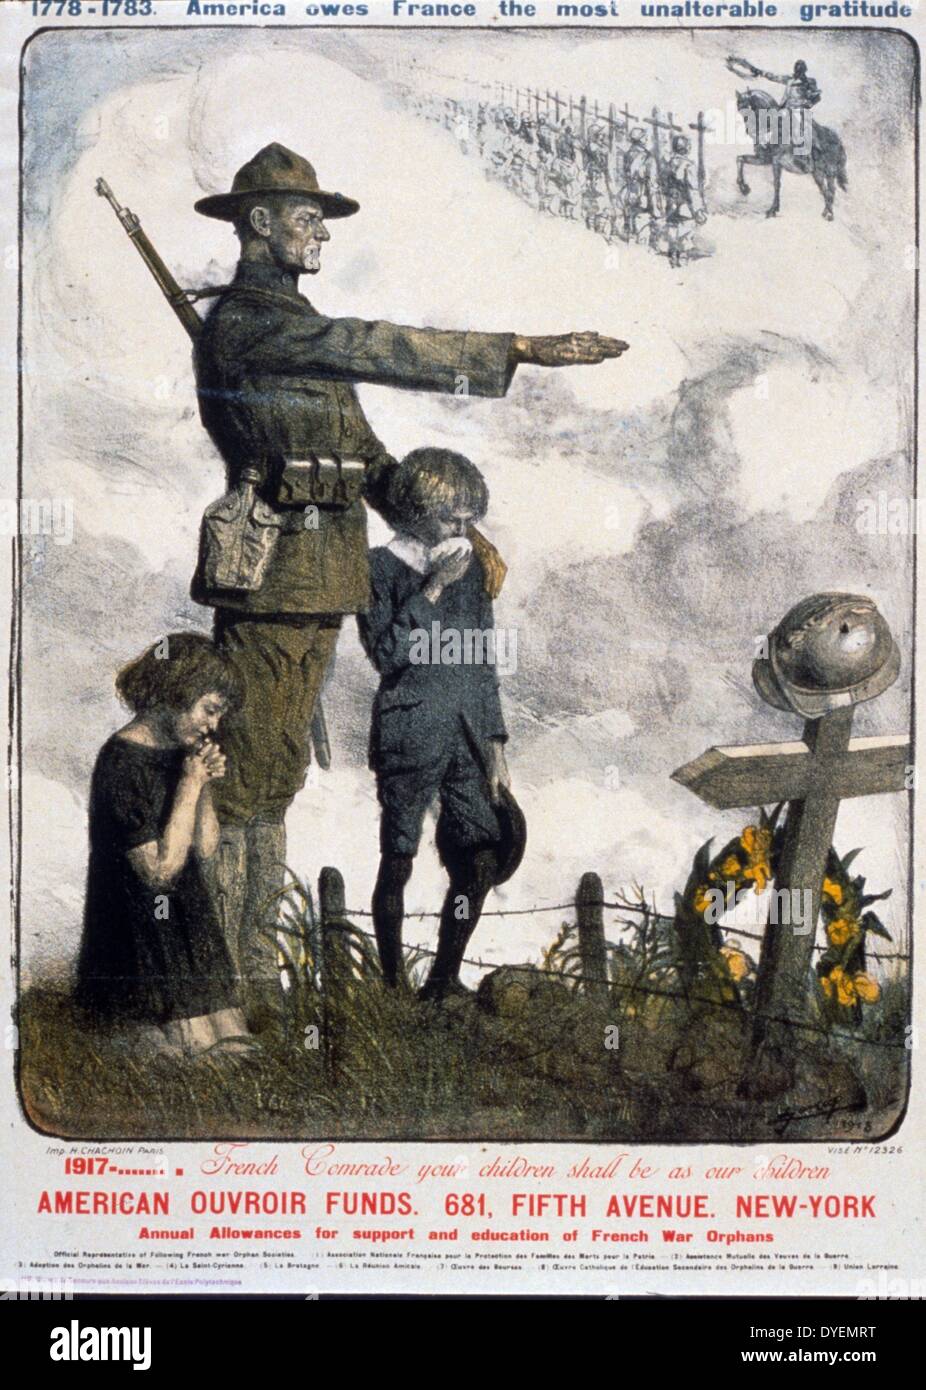 1778-1783 America owes France the most unalterable gratitude. 1917. French comrade, your children shall be as our children. American Ouvroir Funds. Poster by Lucien Jonas, 1880-1947, artist, [1918]. An American soldier standing with two children at the grave of a French soldier. Stock Photo